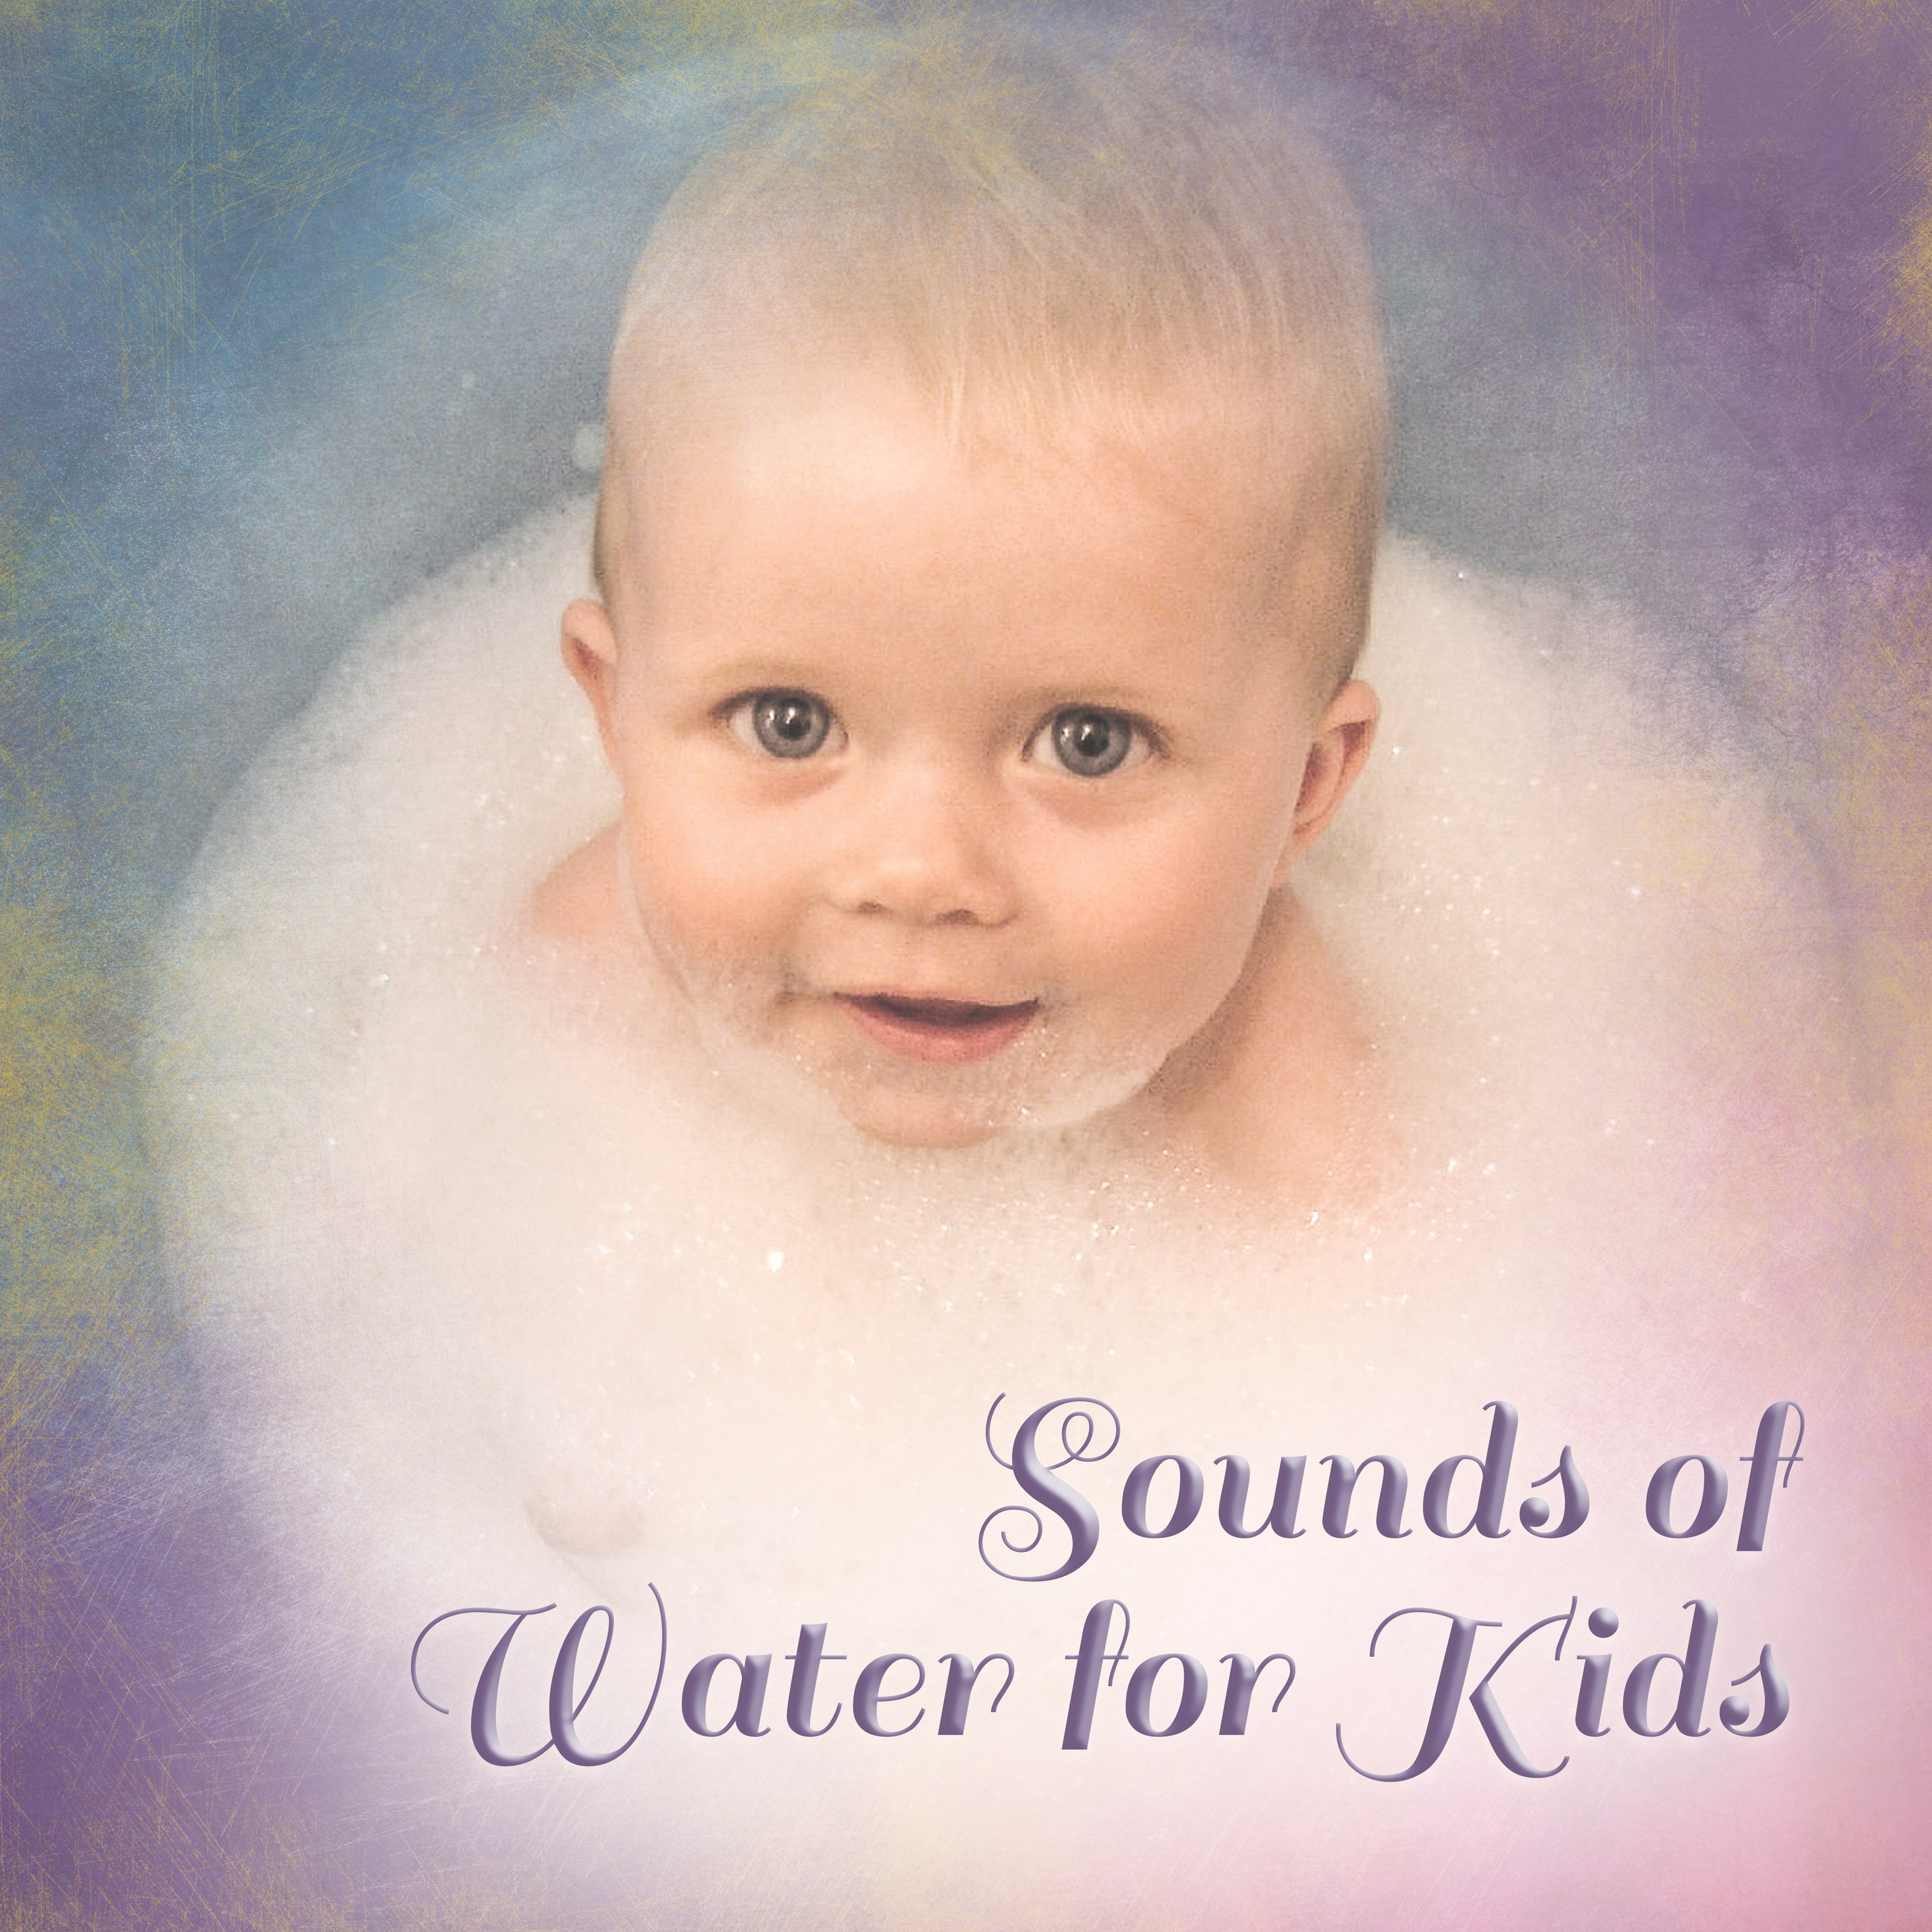 Sounds of Water for Kids